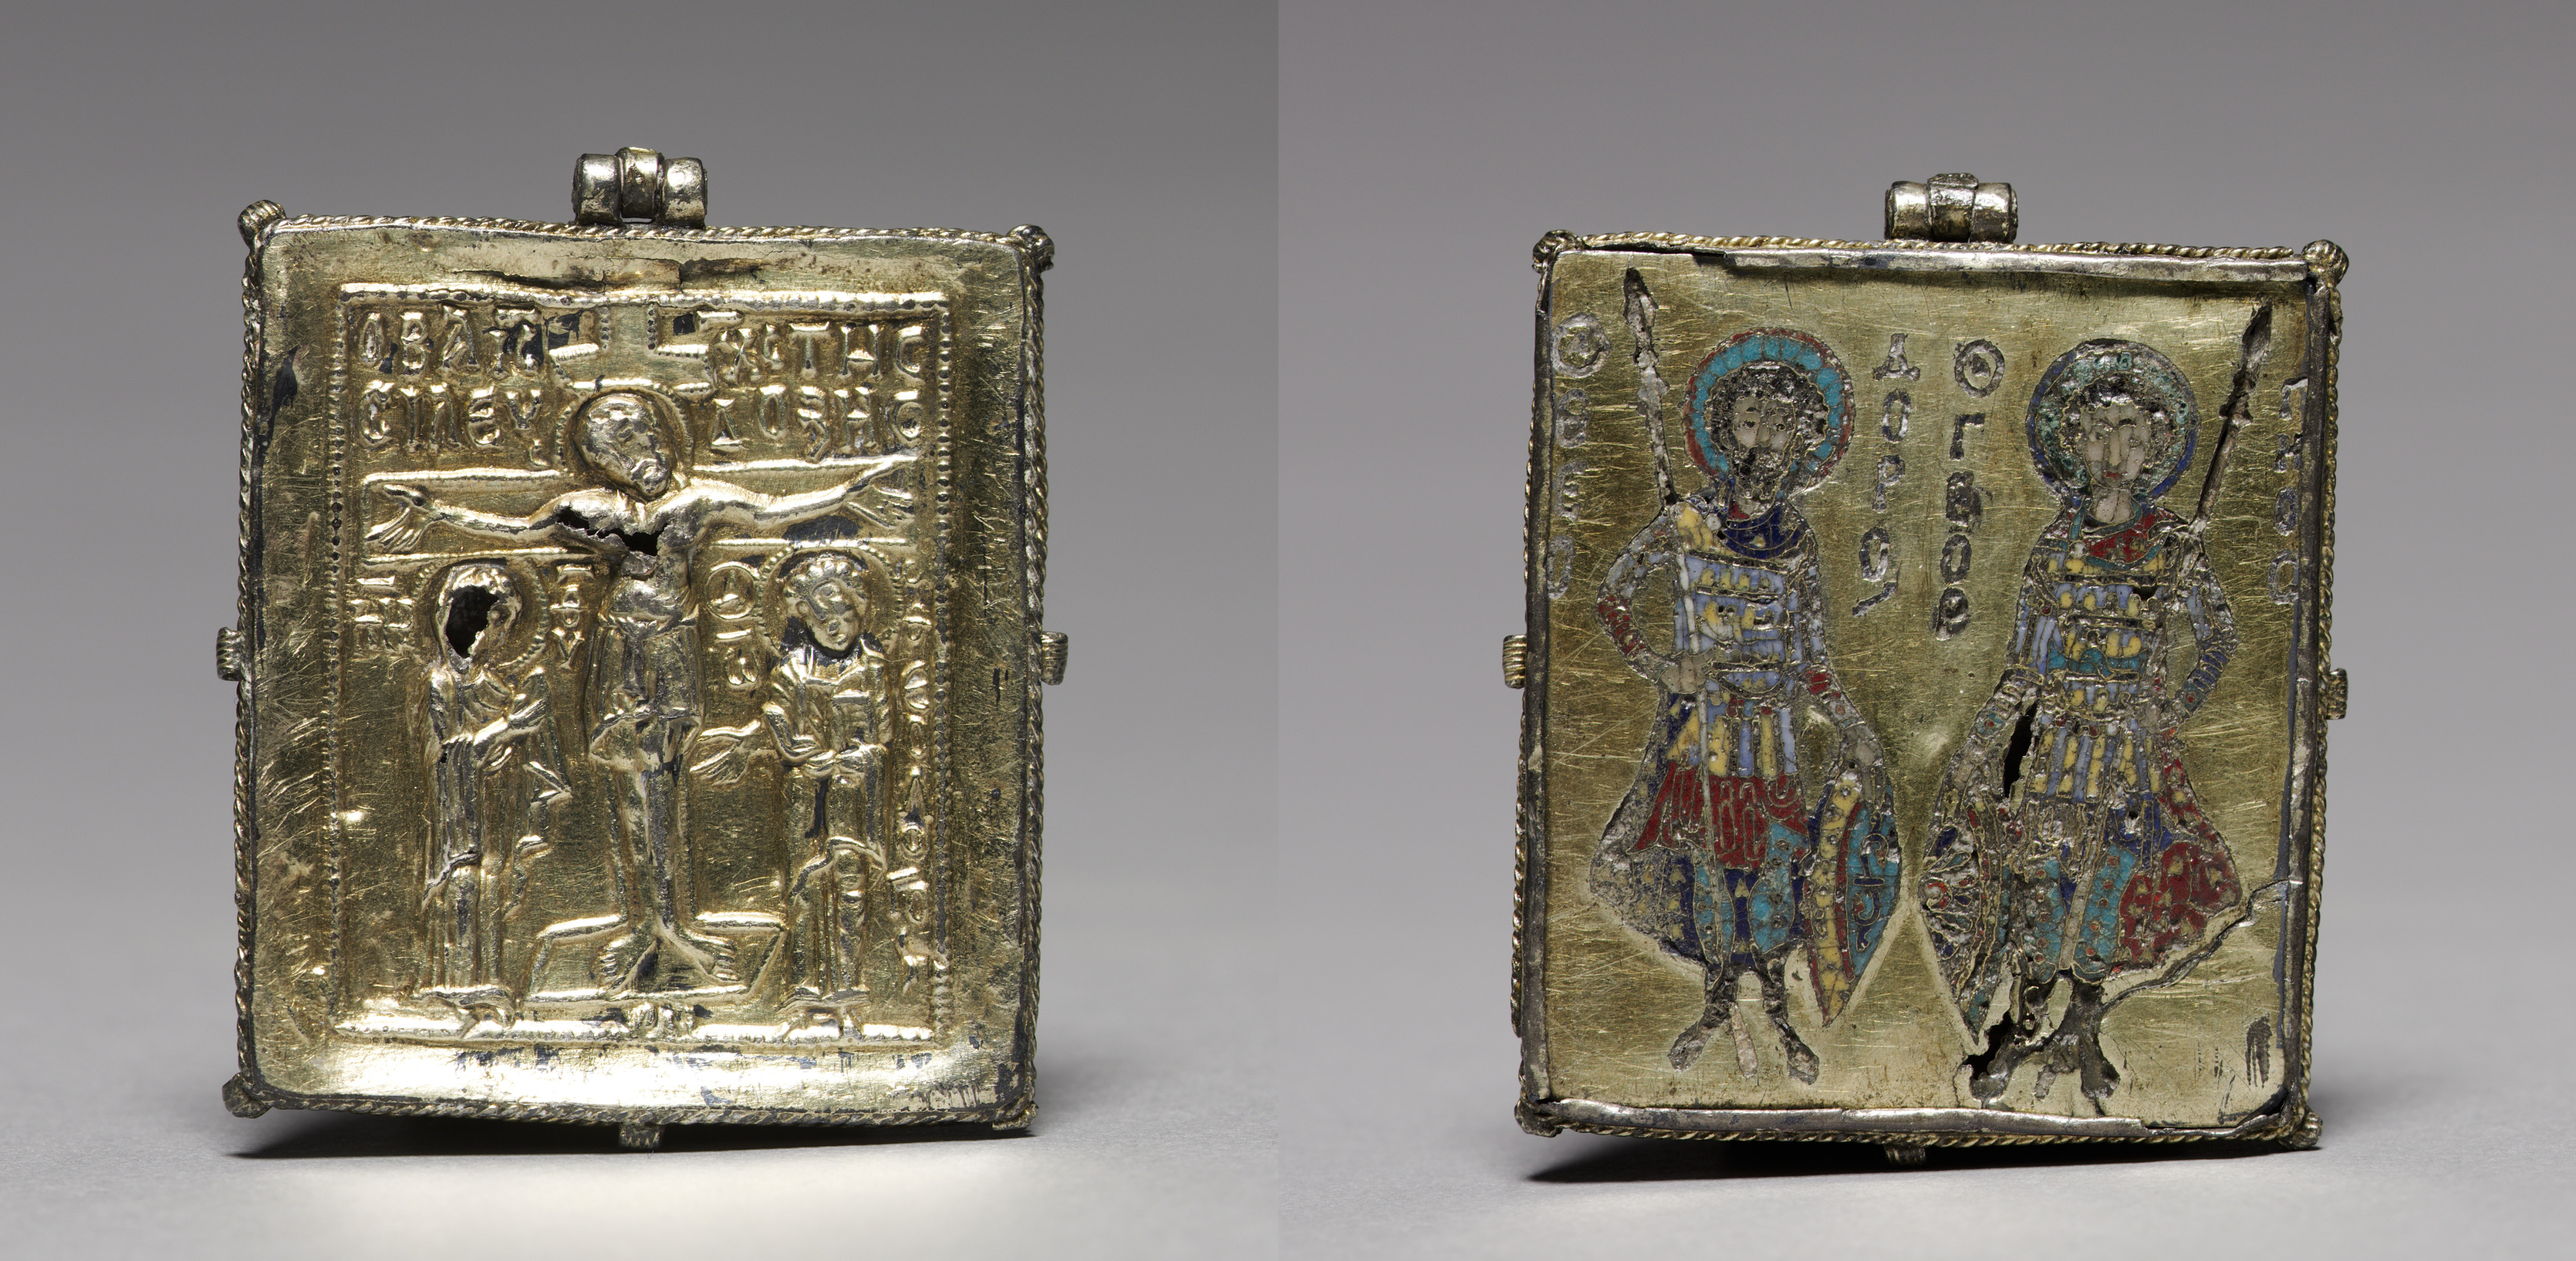 Enkolpion with the Crucifixion (front) and Saints Theodore and George (back)